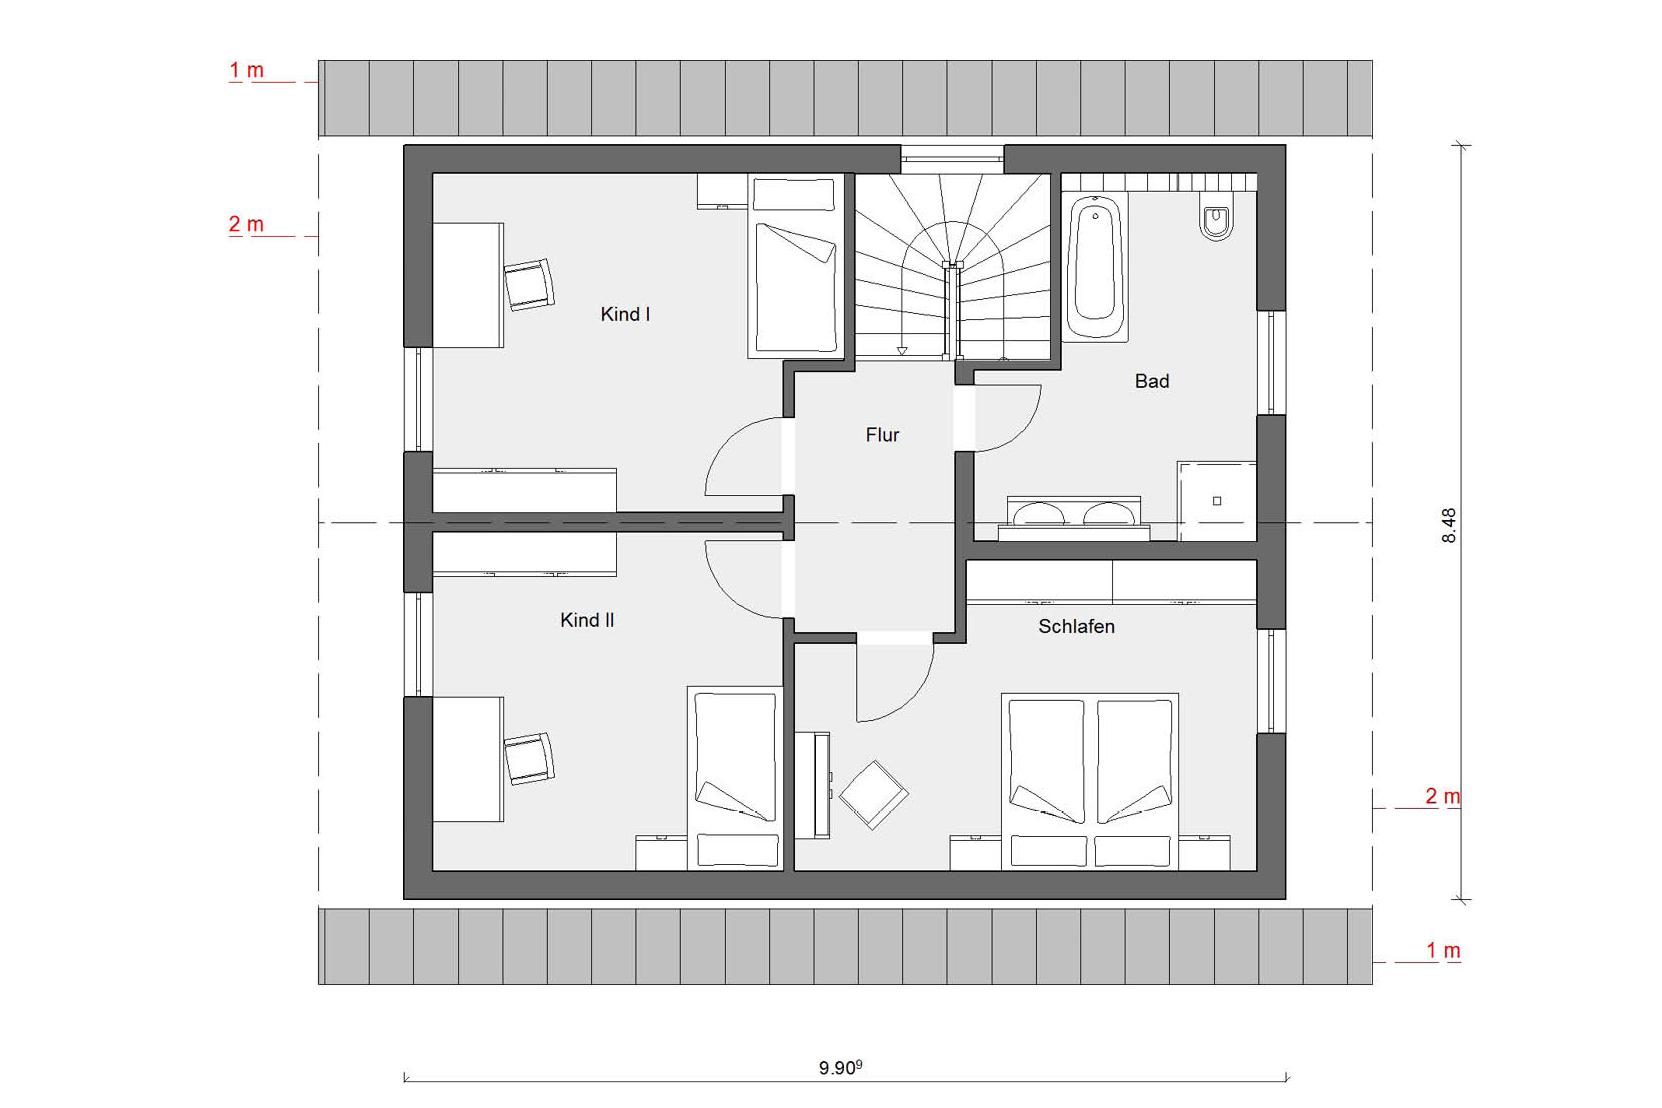 Floor plan attic E 15-137.4 Detached house with pitched roof